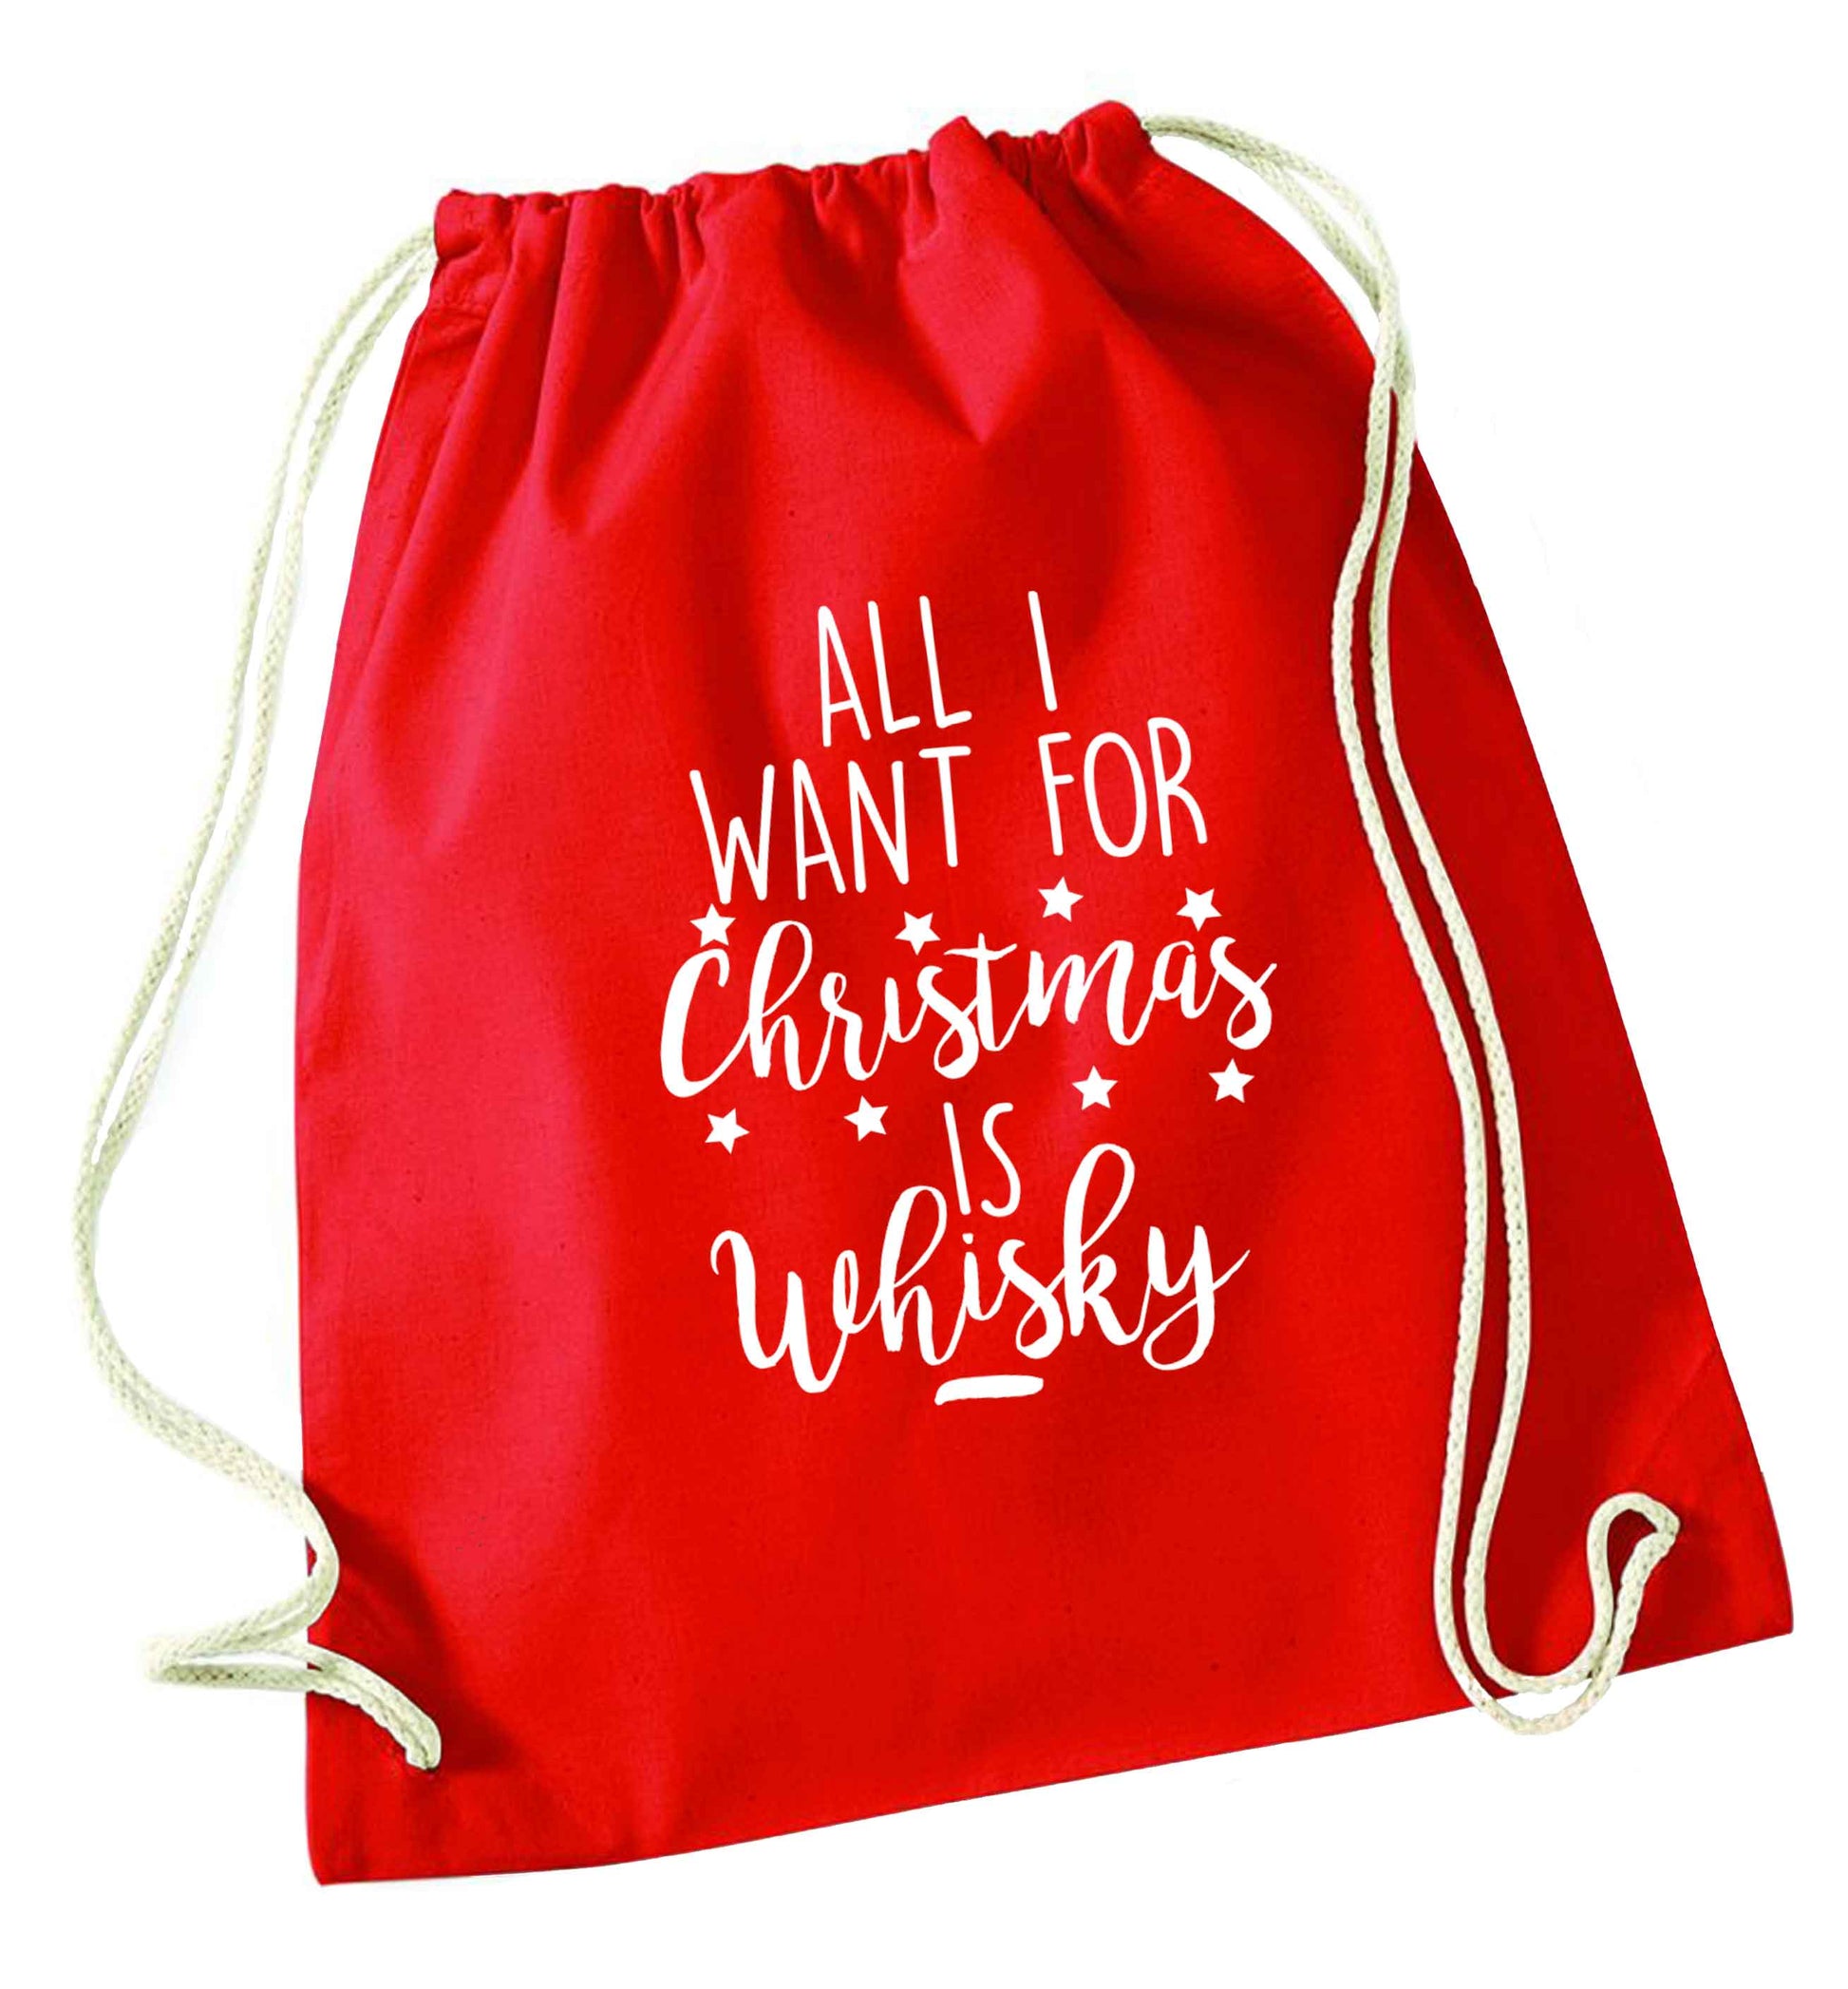 All I want for Christmas is whisky red drawstring bag 